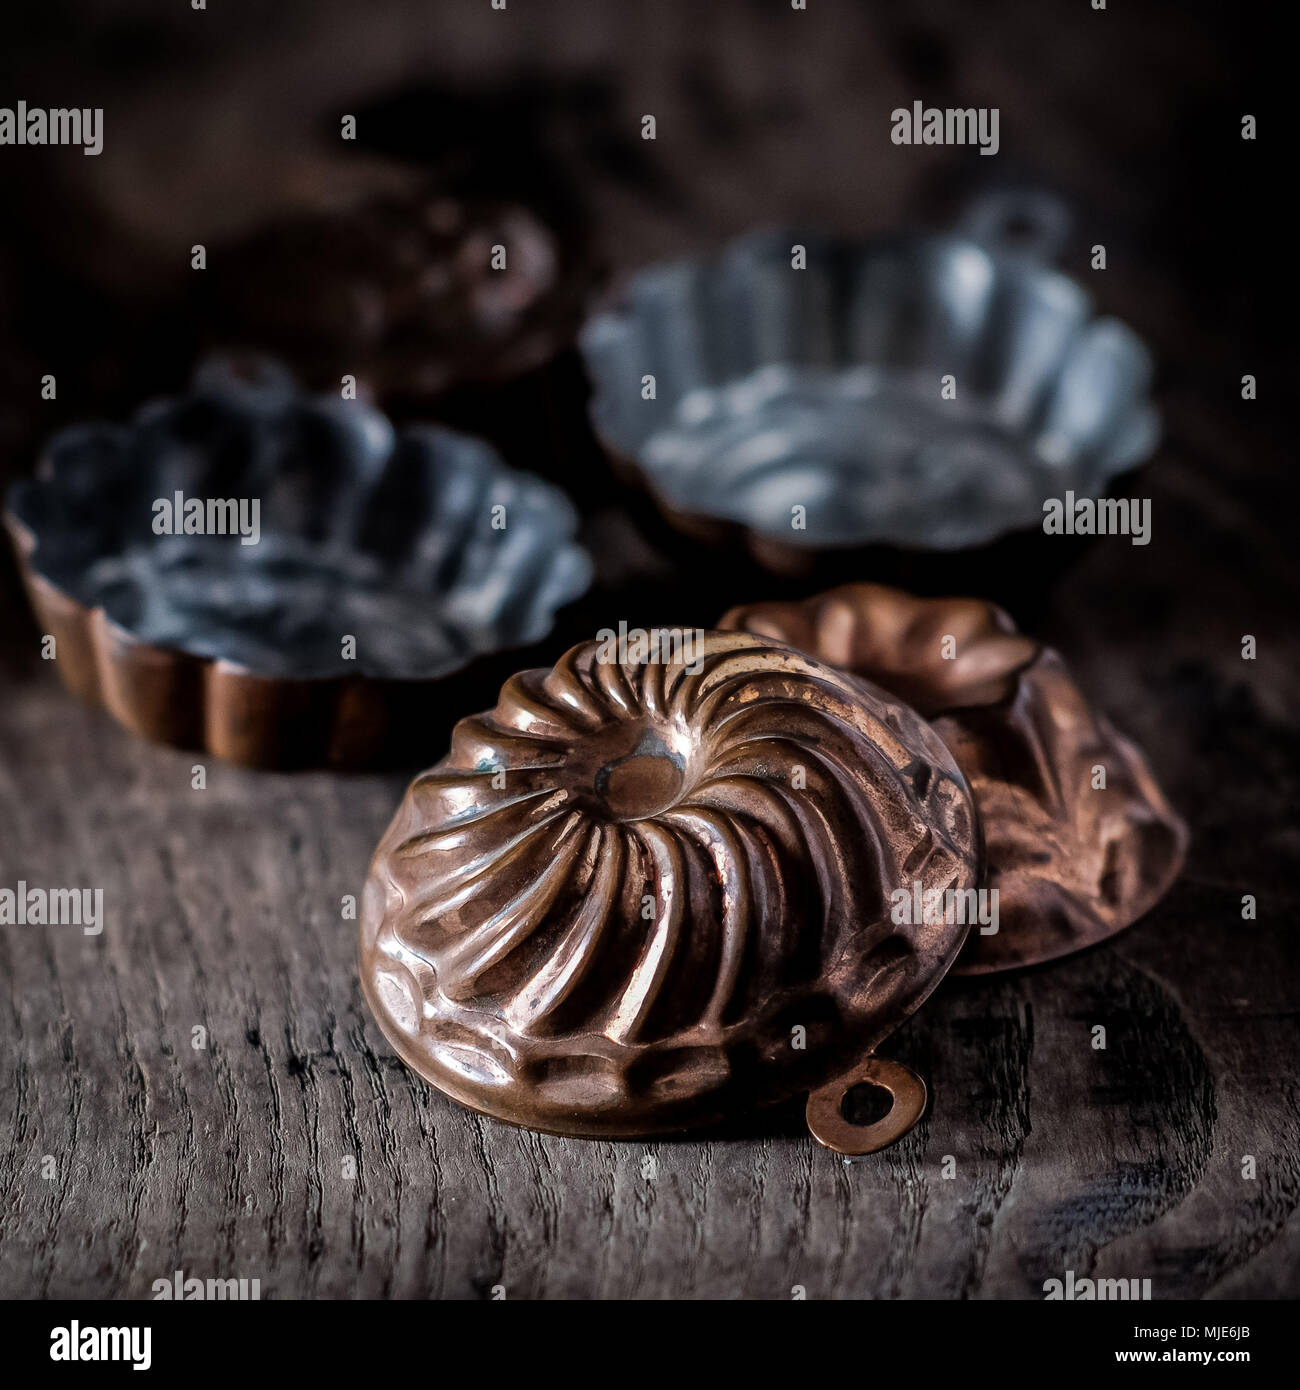 Vintage and Weathered Baking Pan 11x15food Photography 